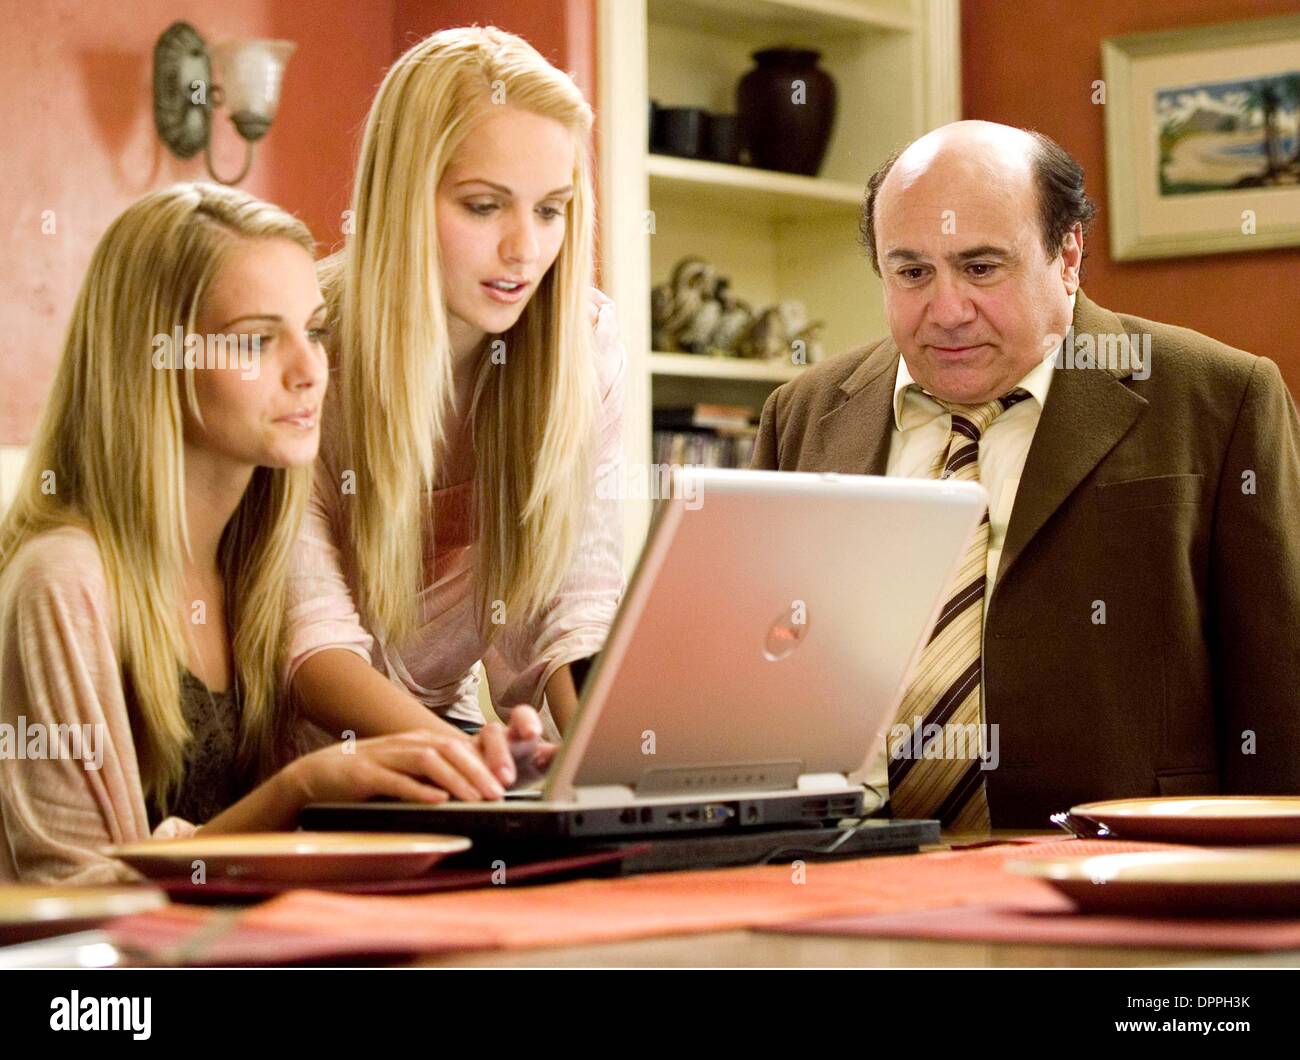 Oct. 30, 2006 - Buddy Hall (Danny DeVito) watches his twin daughters Ashley (Sabrina Aldridge) and Emily (Kelly Adridge) do some critical work for him.K51213ES.'' DECK THE HALLS ''.TV-FILM STILL. SUPPLIED BY    2006.(Credit Image: © Globe Photos/ZUMAPRESS.com) Stock Photo